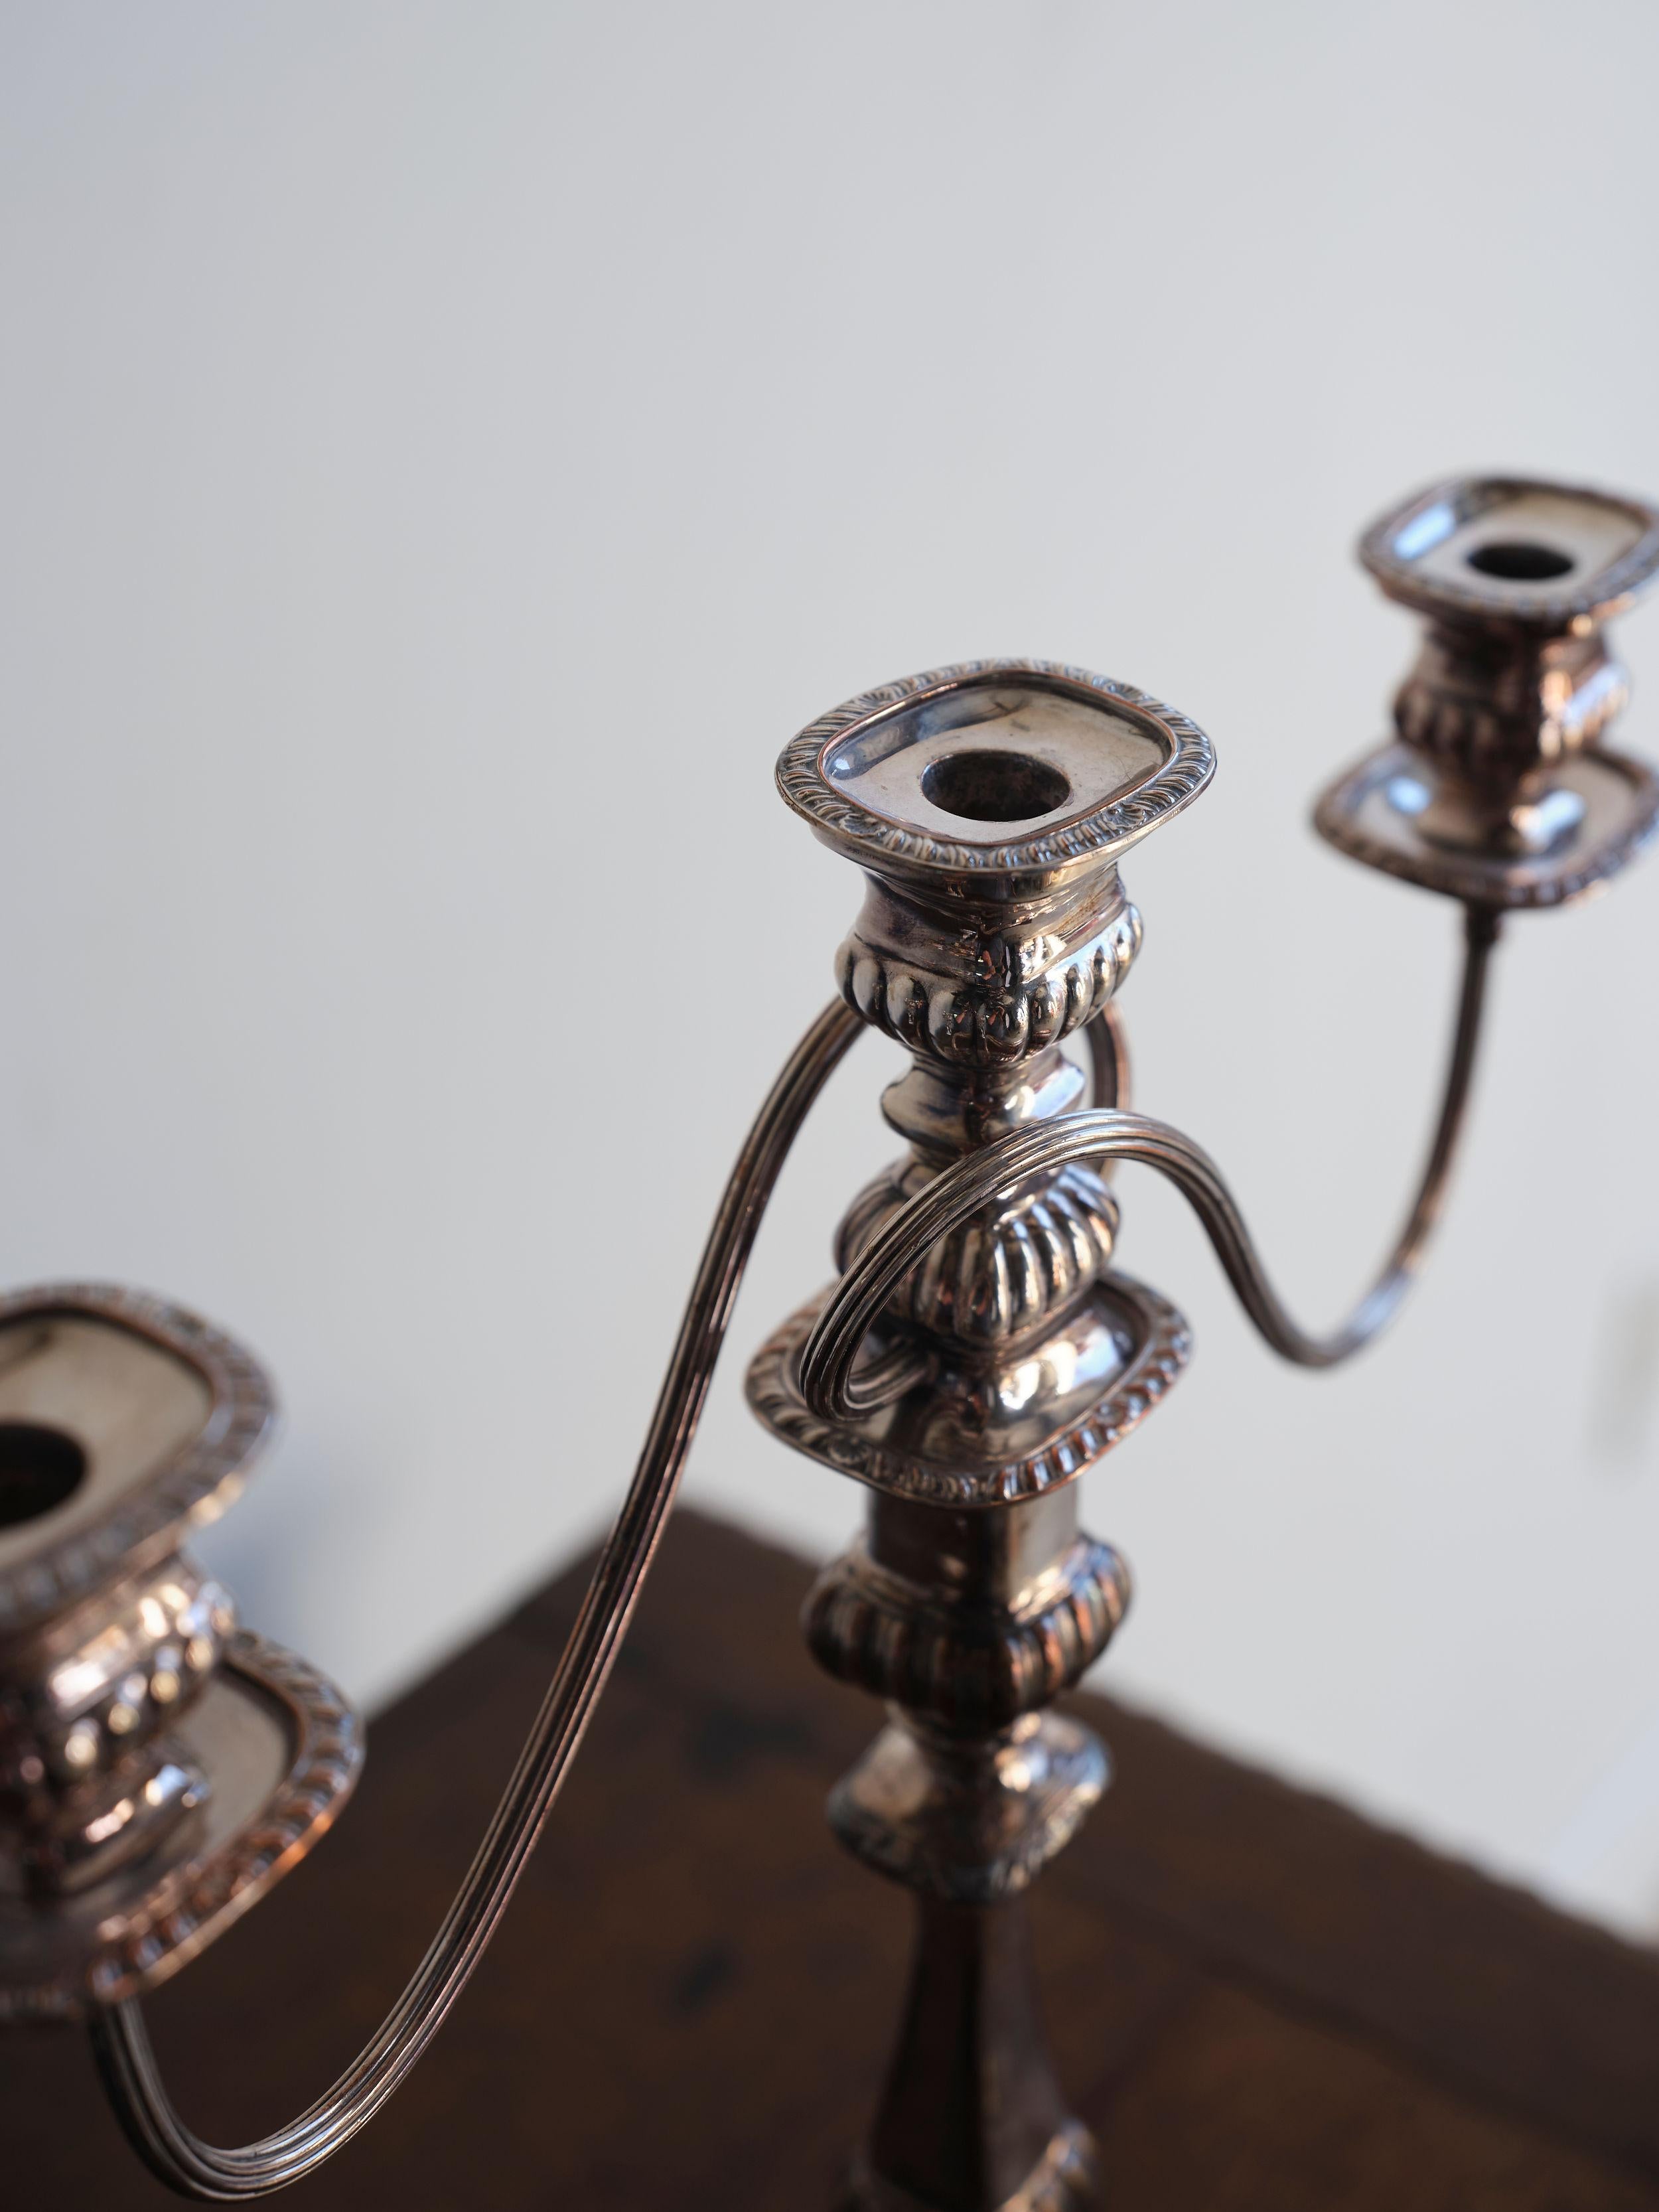 This beautiful pair of silver candlesticks has so many unique details. There are 3 candle base 